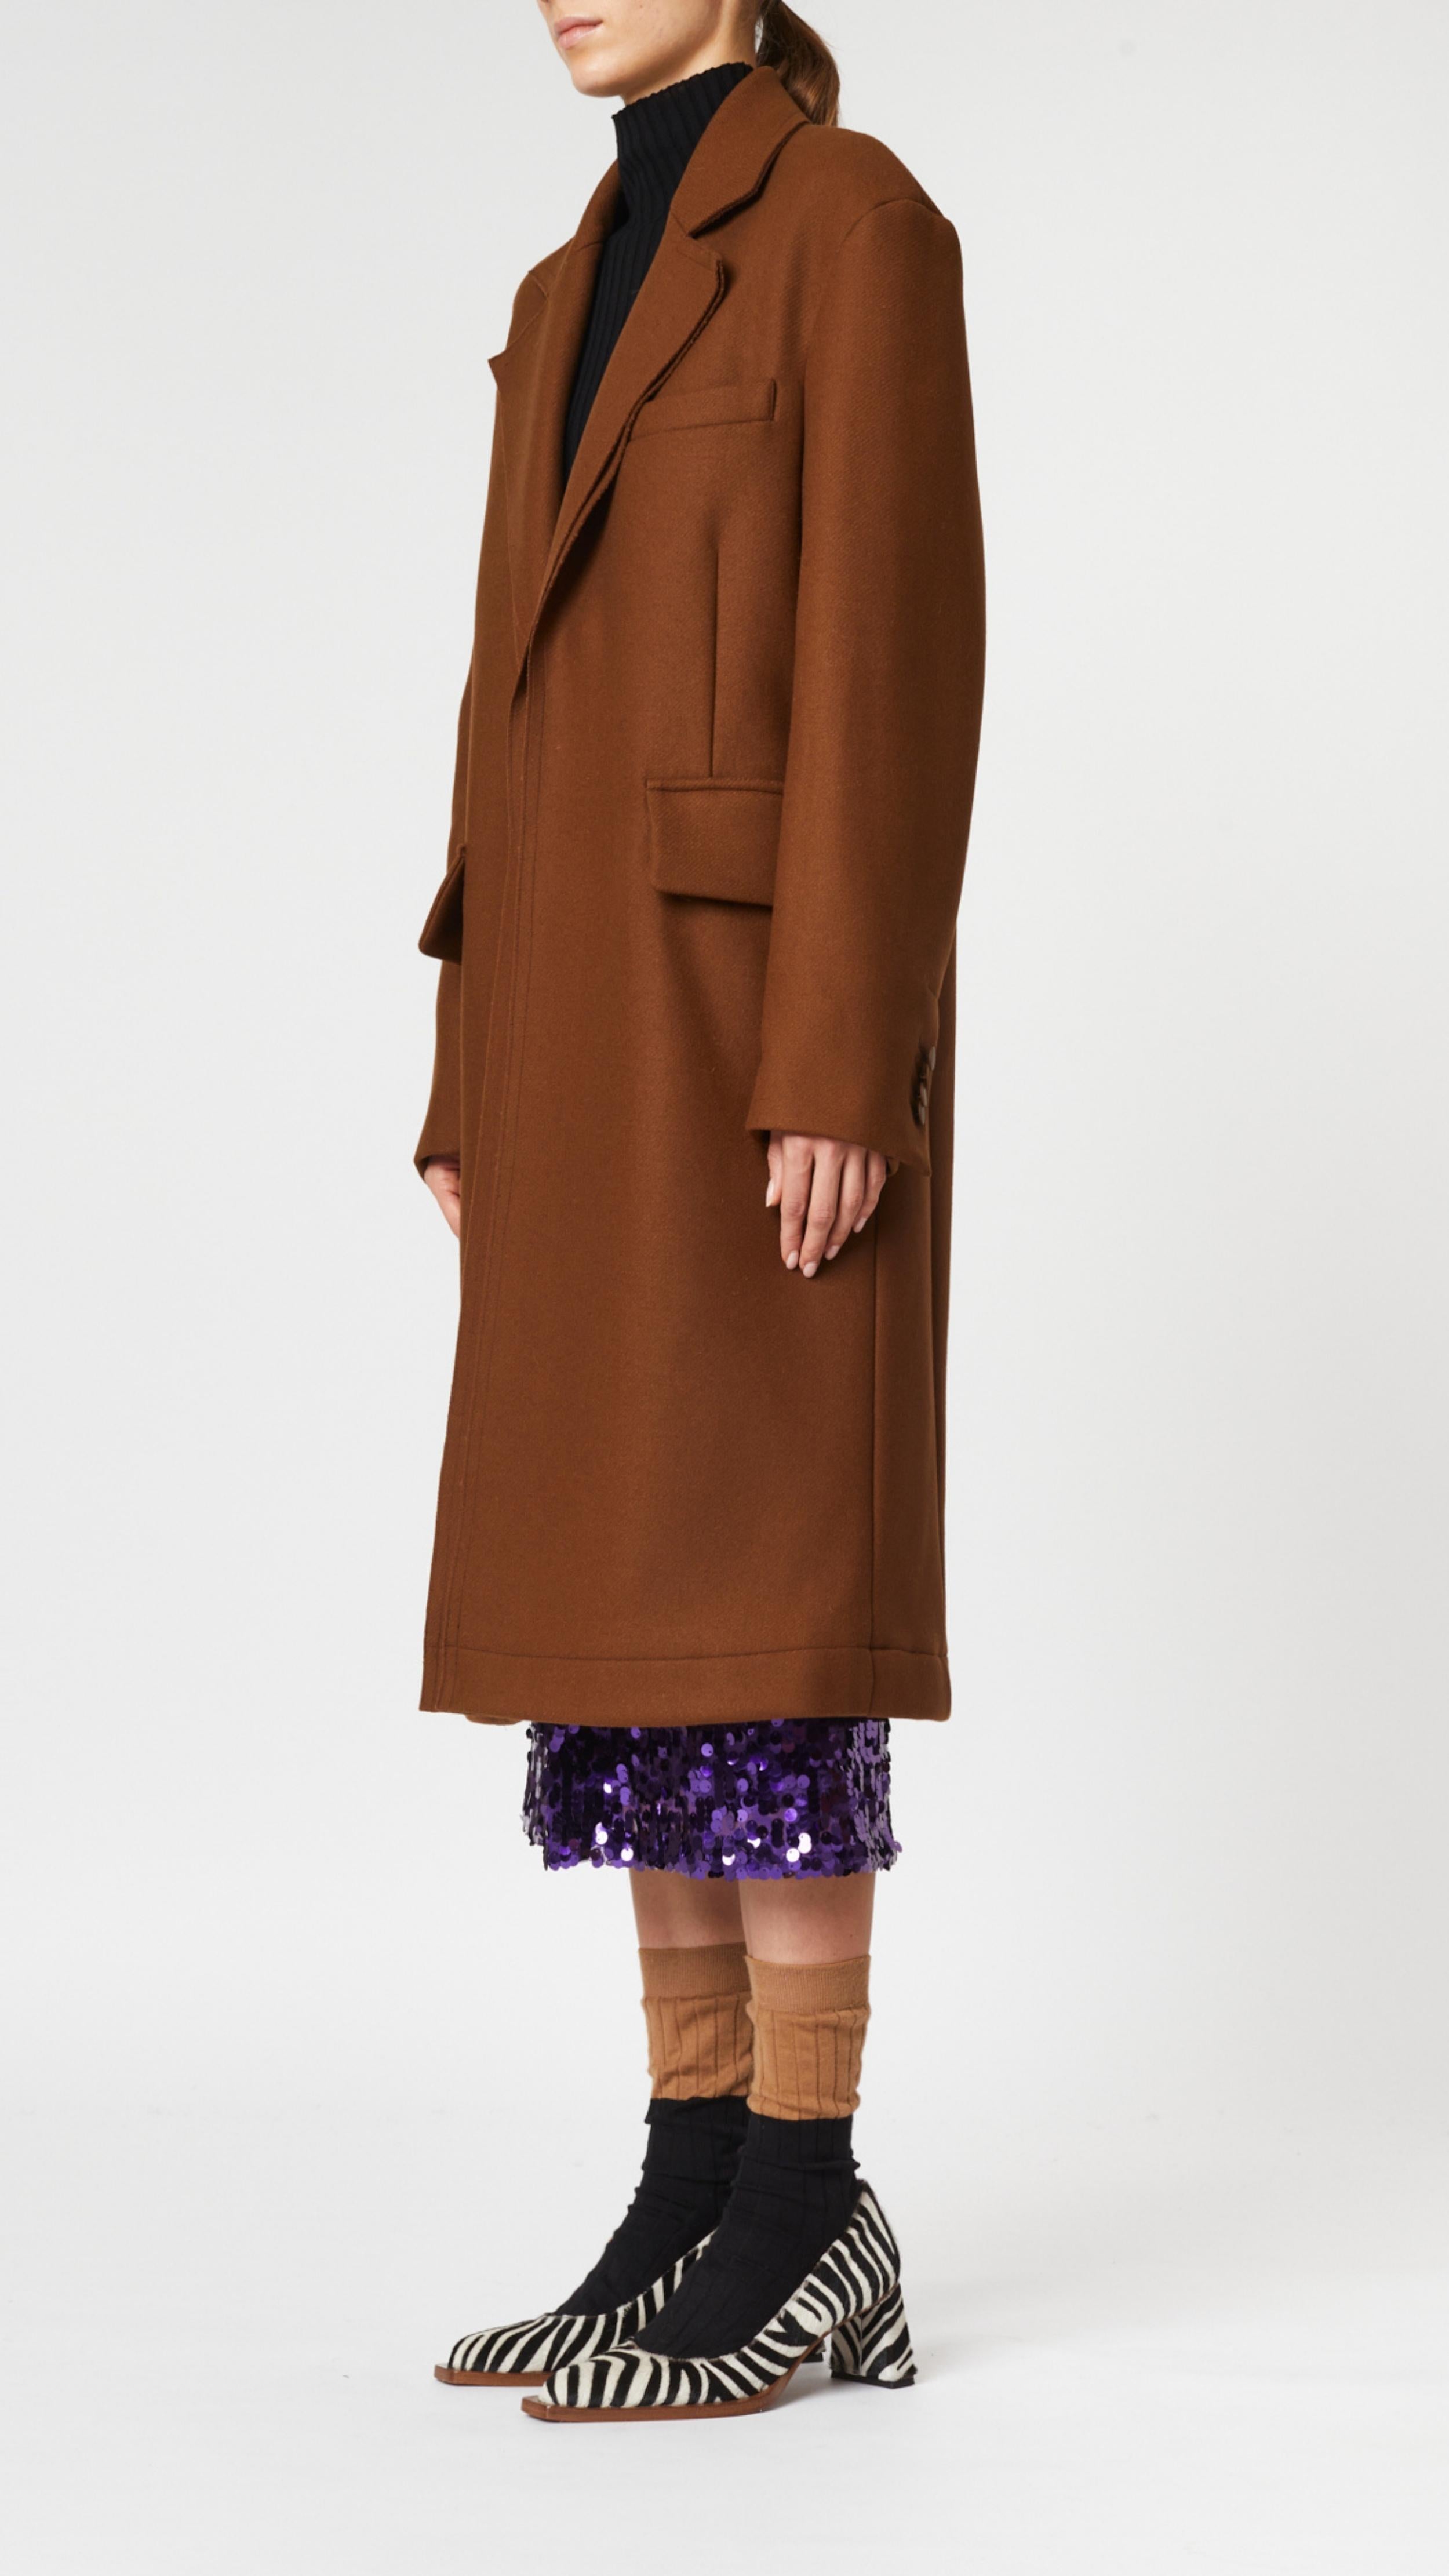 Plan C Chestnut Wool Overcoat. Classic but with a modern esthetic with coat jacket. Chestnut brown Italian wool with double layers. Midi length and long sleeves. Shown on model facing to the side.